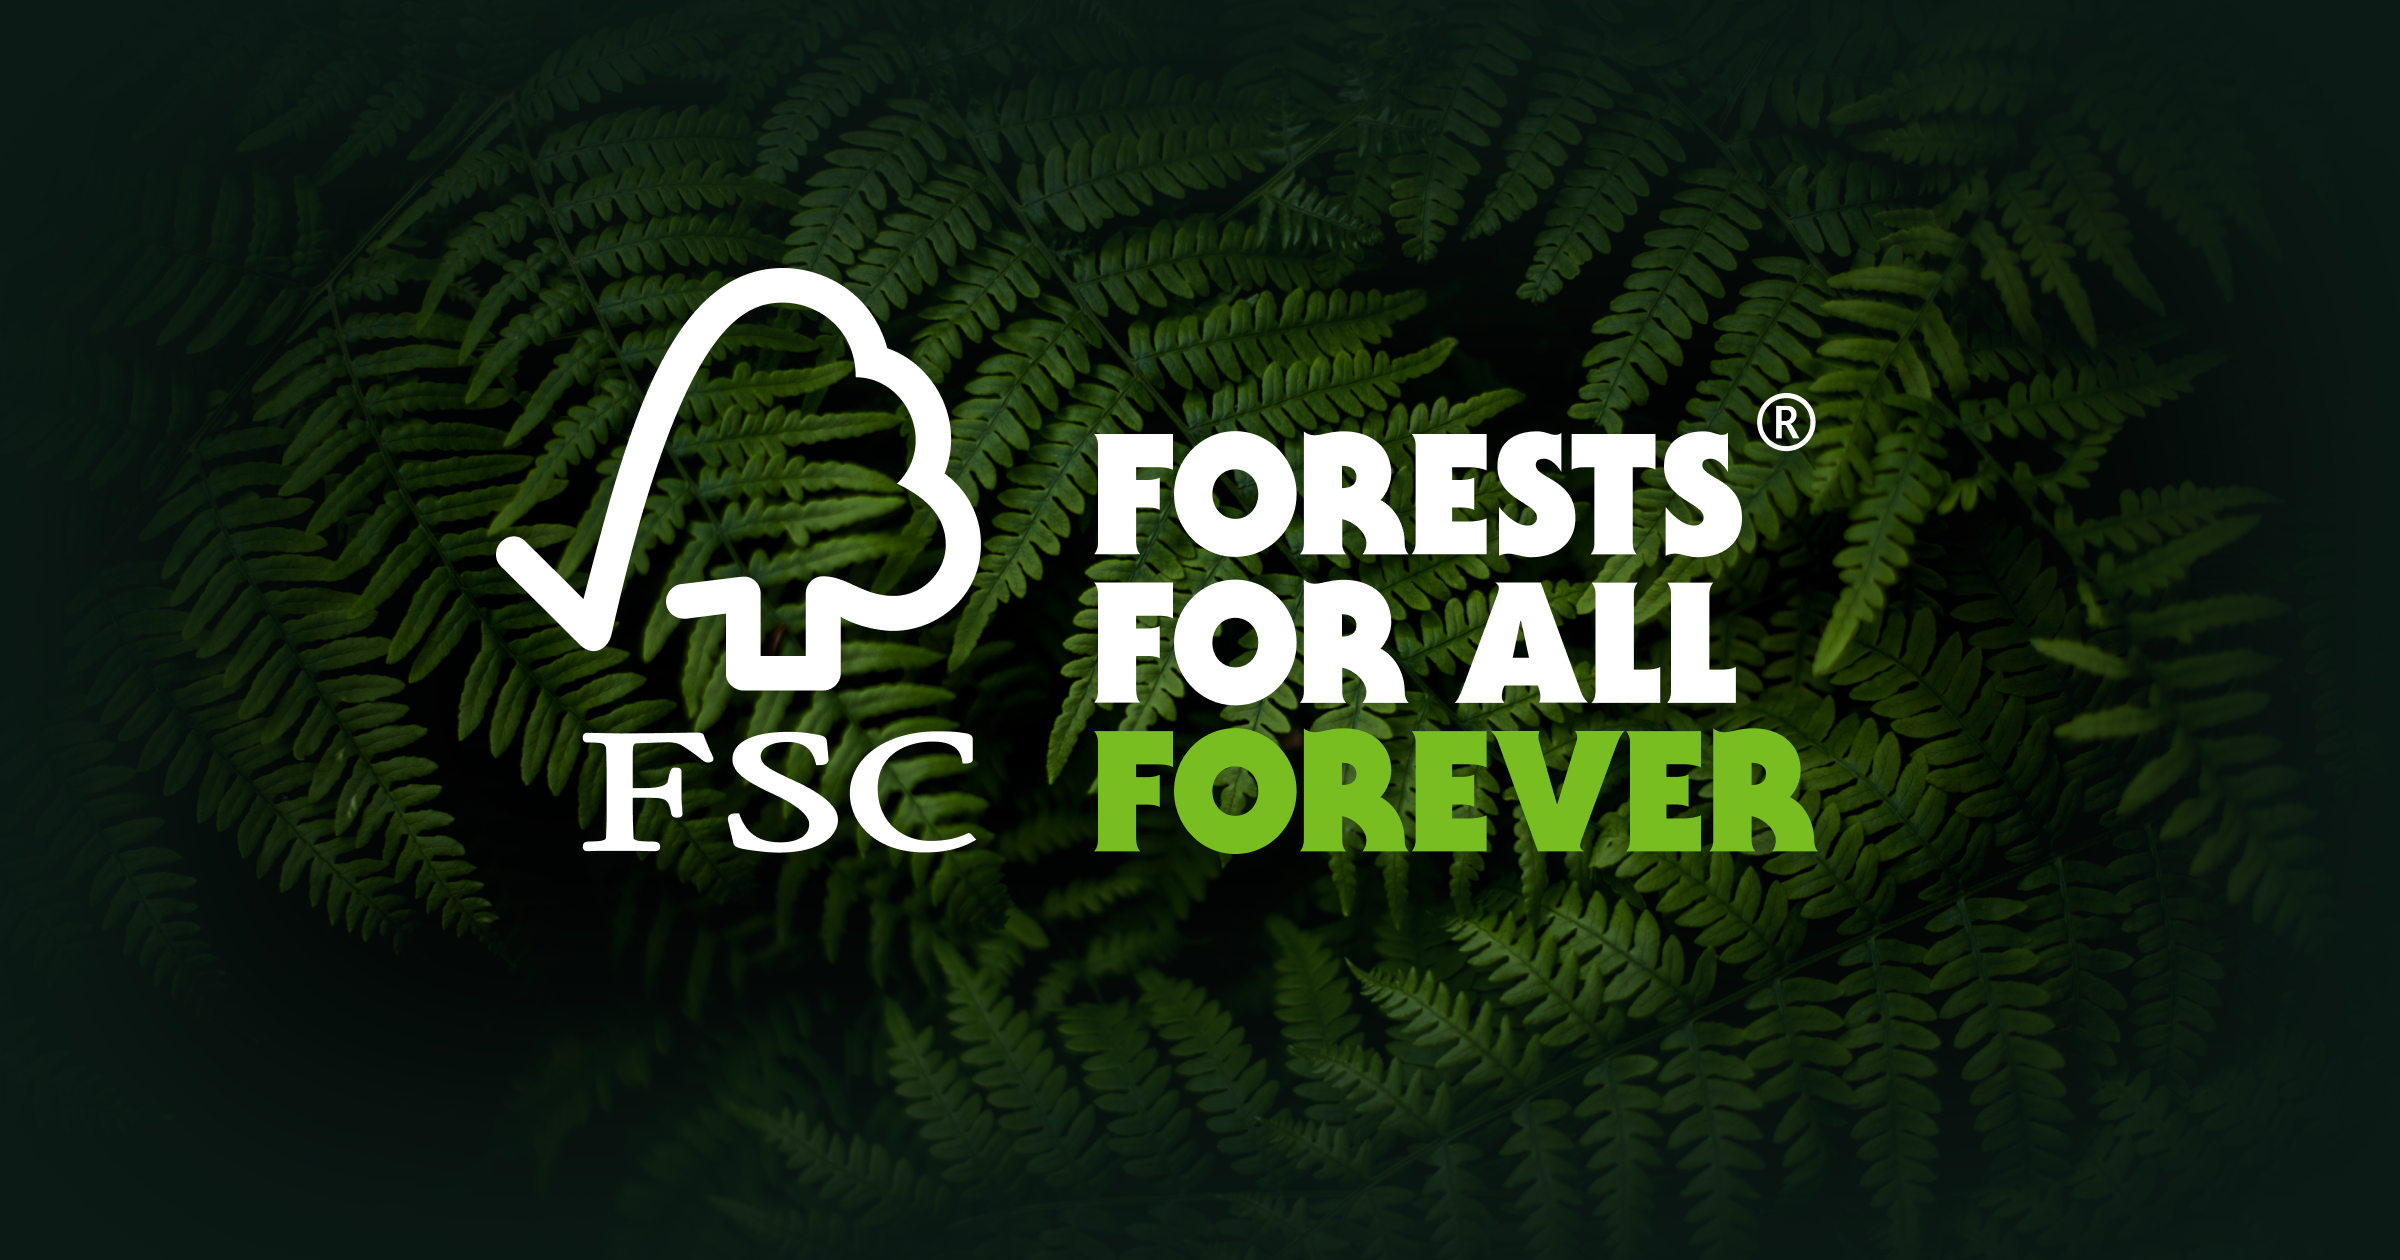 FSC Certificate: All Details To Know